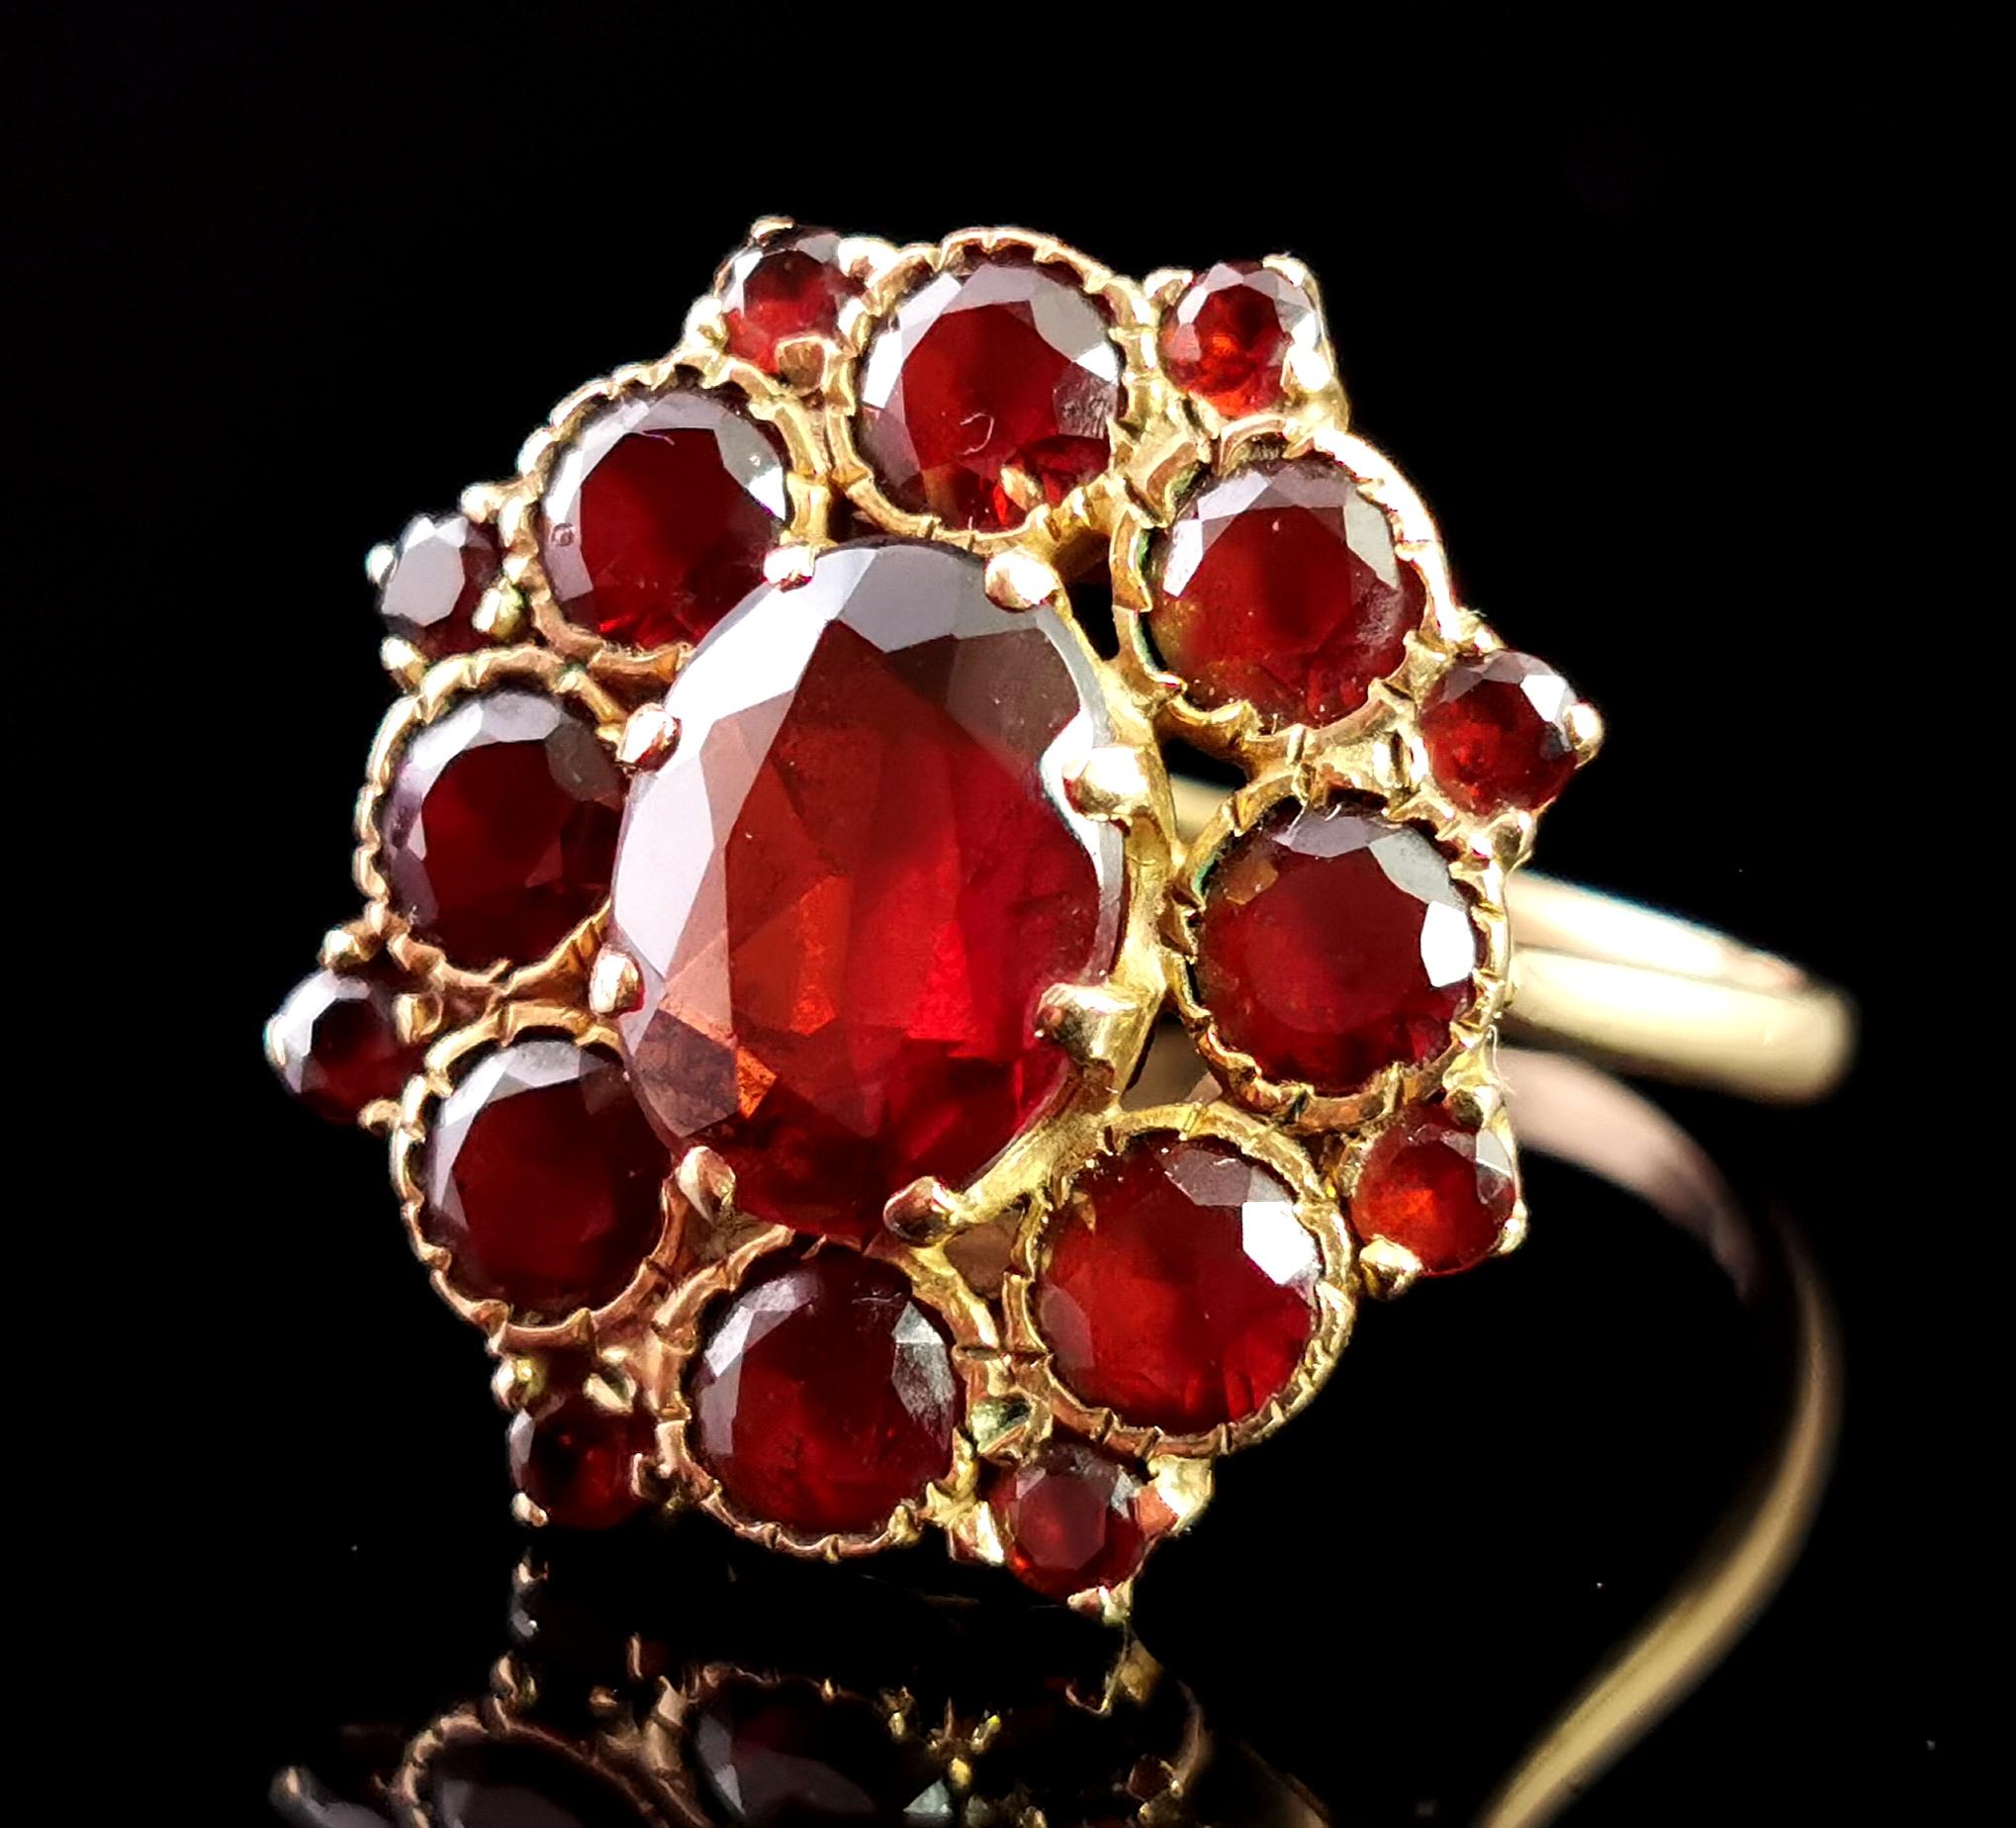 A gorgeous vintage garnet dress ring.

If you were looking for a cluster ring with oomph then this is your girl!

To the centre there is a large, faceted oval cut garnet, rich, warm red, approximately 1.98 carat weight, the centre garnet is further